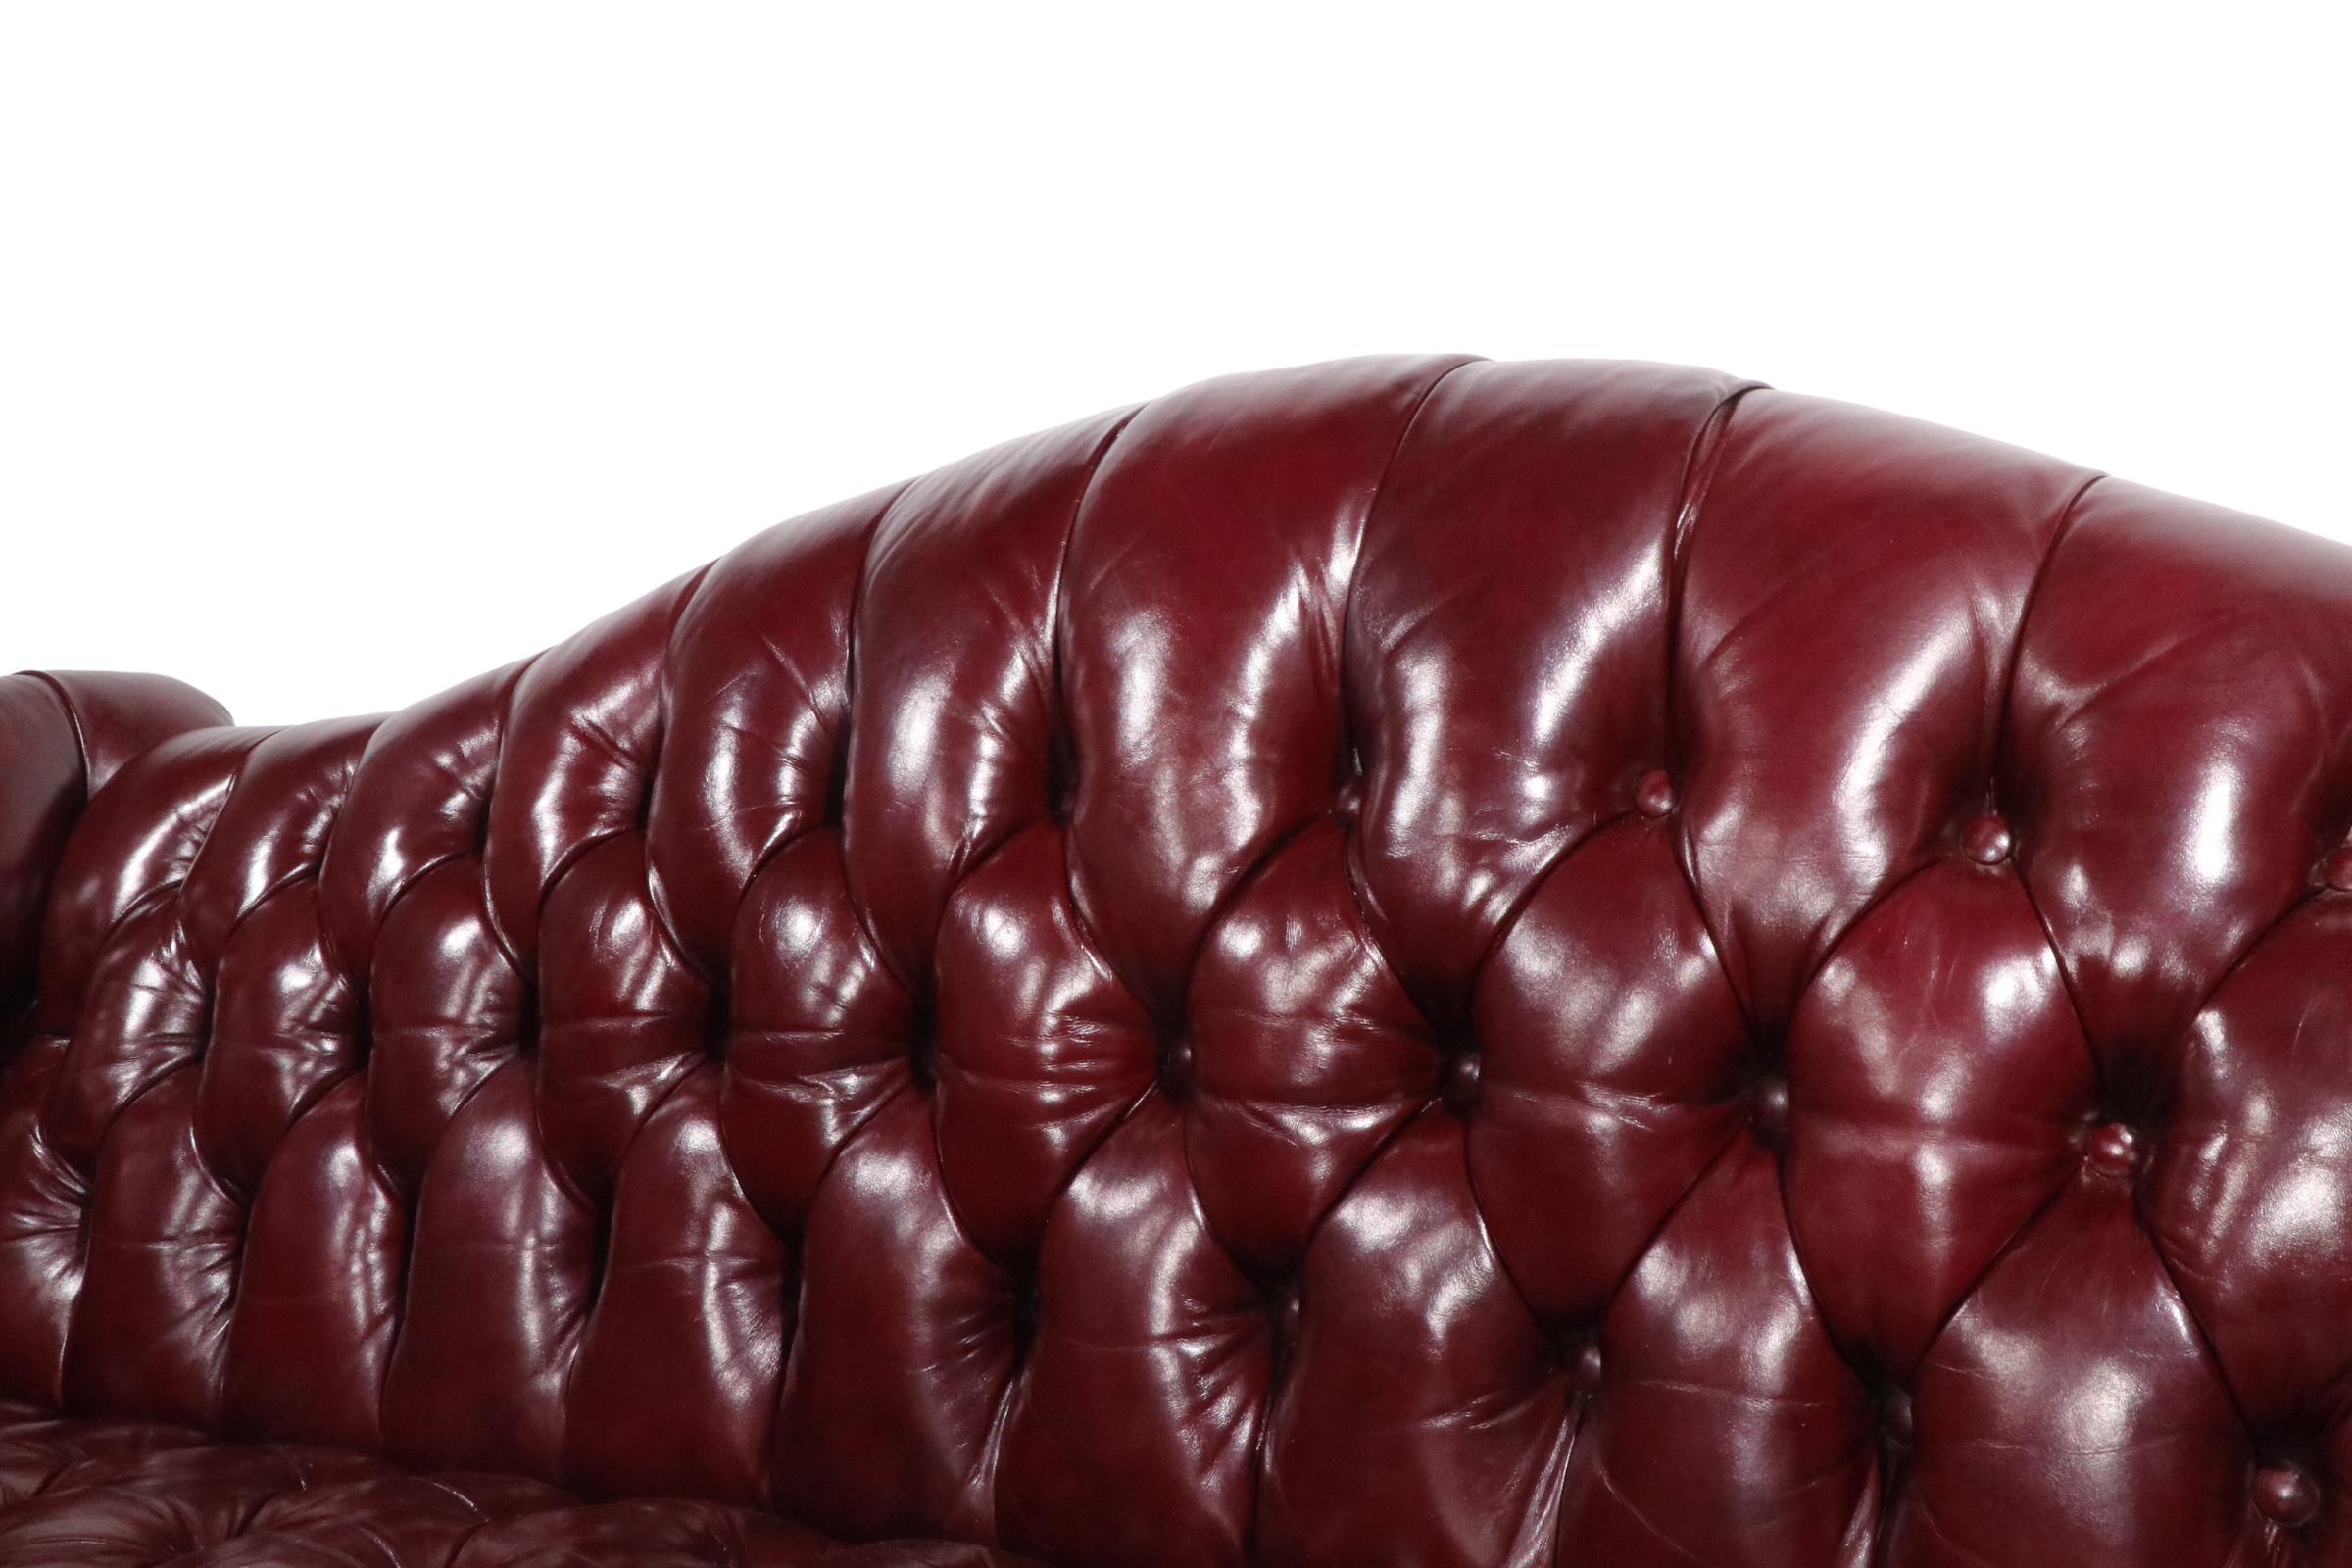 Exceptional Chippendale style camelback sofa in burgundy leather sofa. This stunning sofa features a fully tufted surface, carved mahogany Marlborough style legs, tied spring upholstery, and exposed nailhead trim. The sofa is in excellent original